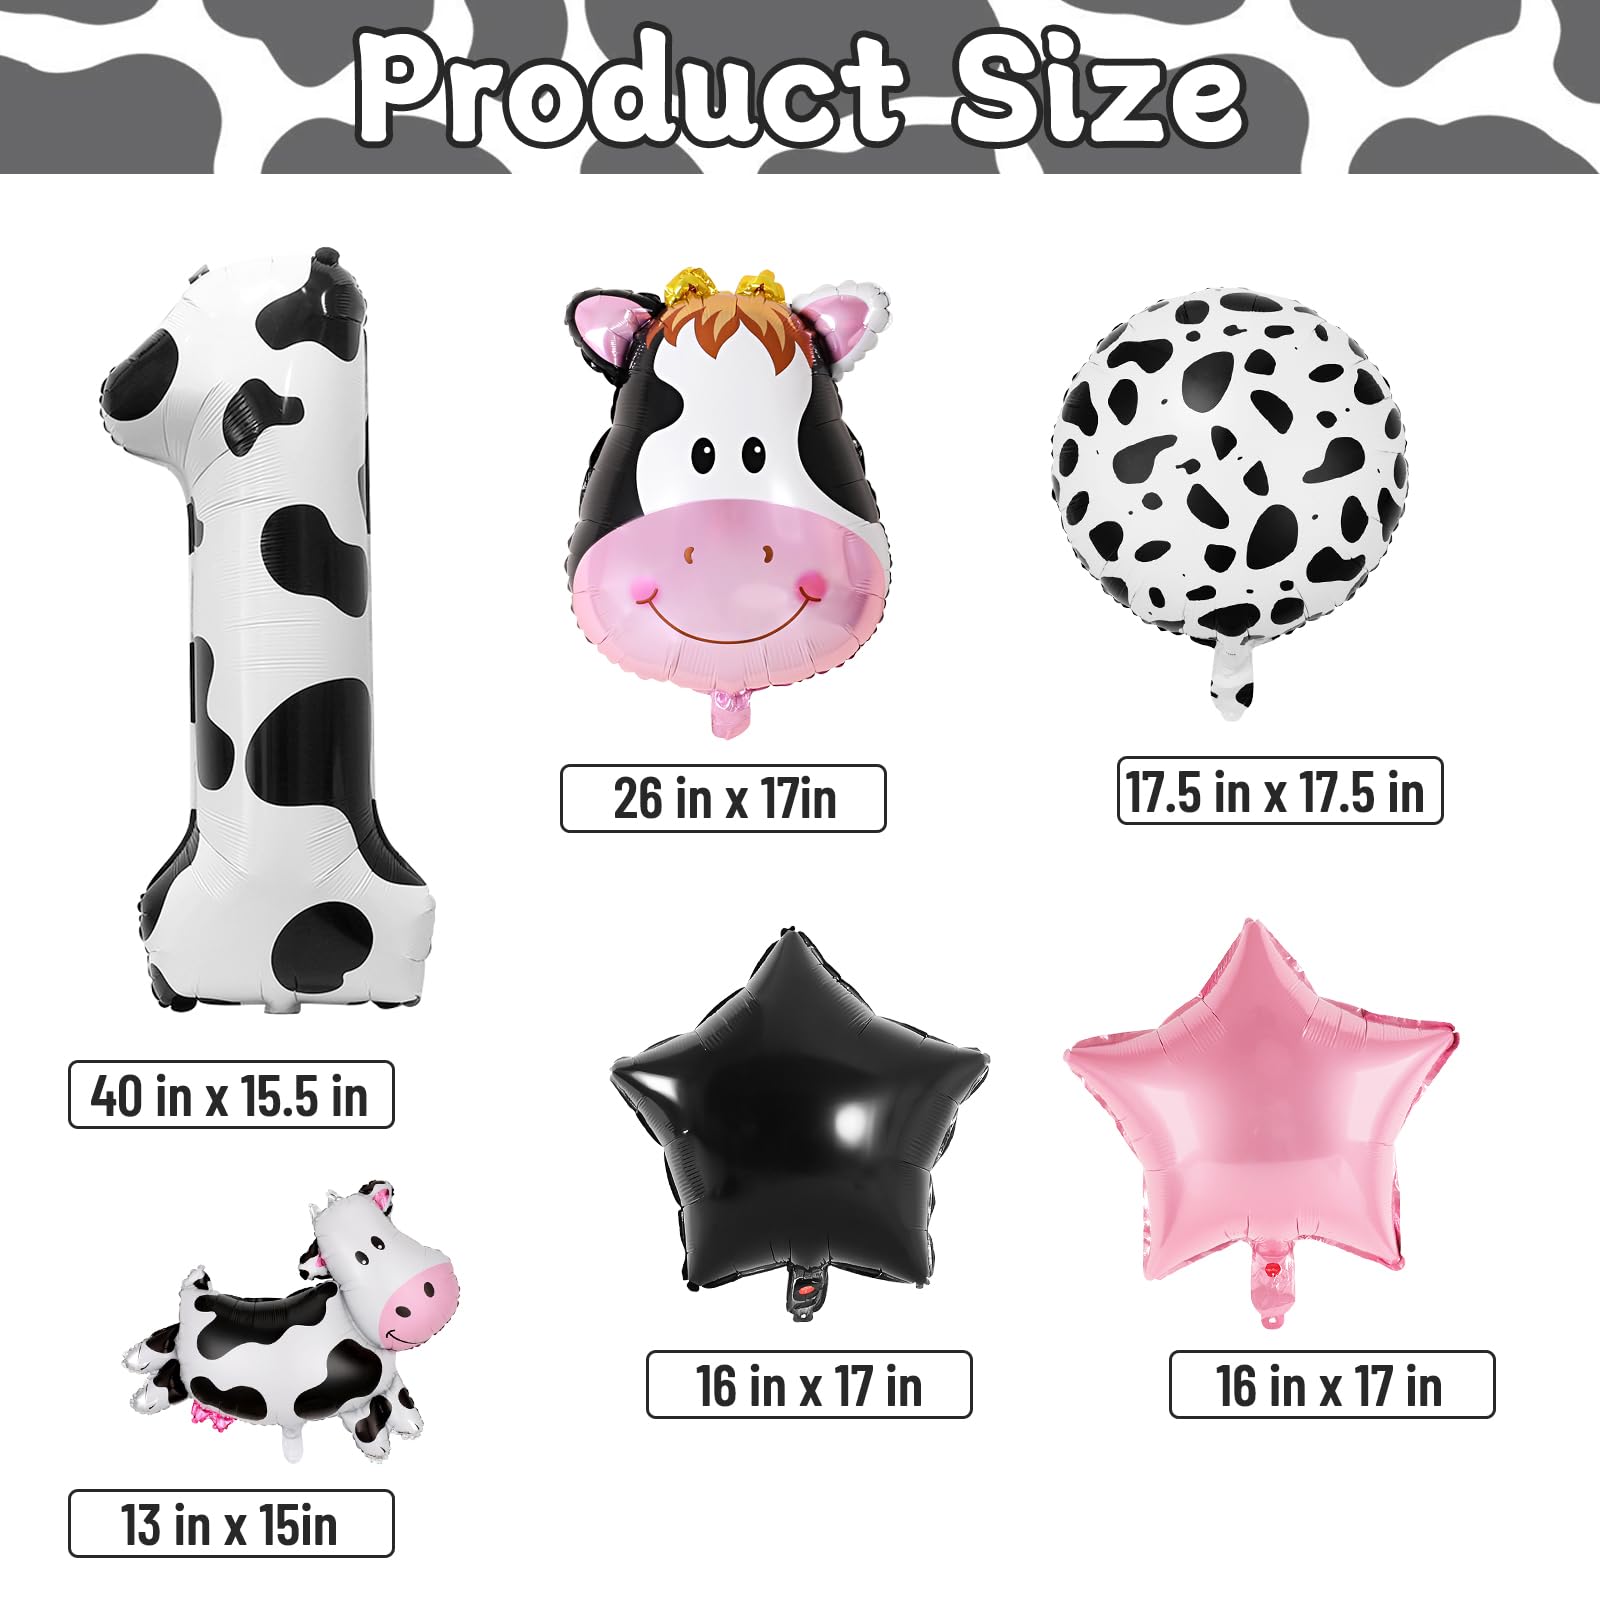 6 Pcs Cow Print Balloons 1st Birthday Party Supplies Cow Farm Animal Theme Decorations Cowgirl Western 40 Inch Number 1 Balloon Star for Baby Shower Girls Boys